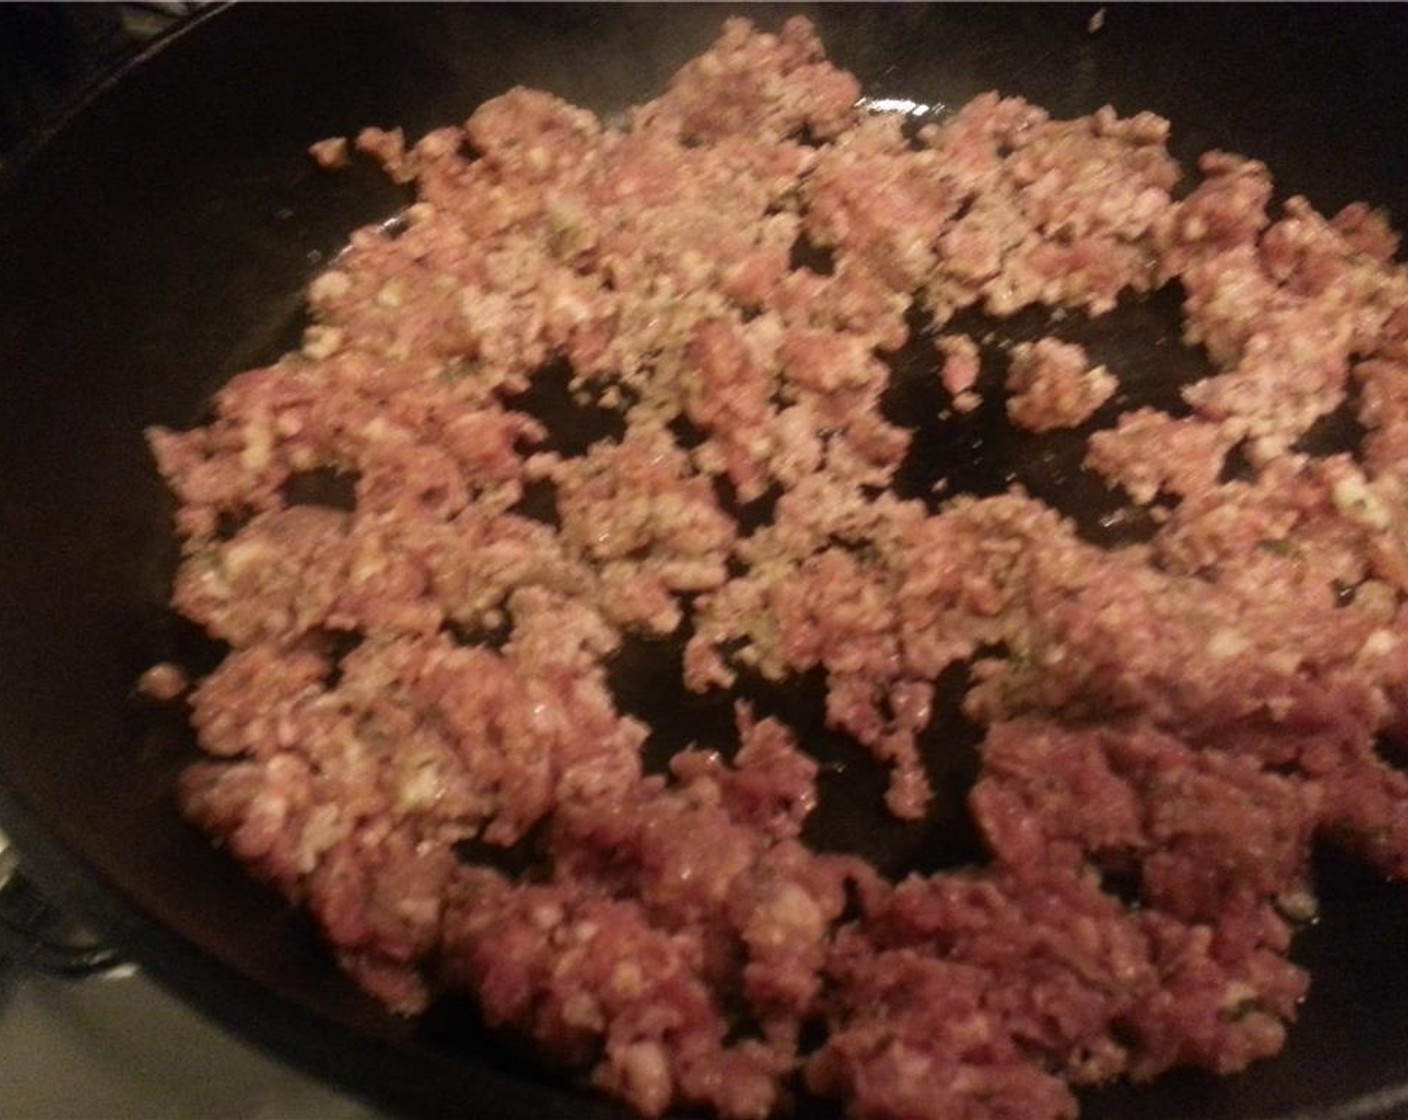 step 2 In a large cast iron pan over medium heat, melt the Unsalted Butter (2 Tbsp) and begin browning the Country Style Sausage (1 lb). Use a wooden spoon to break the sausage up into smaller pieces.